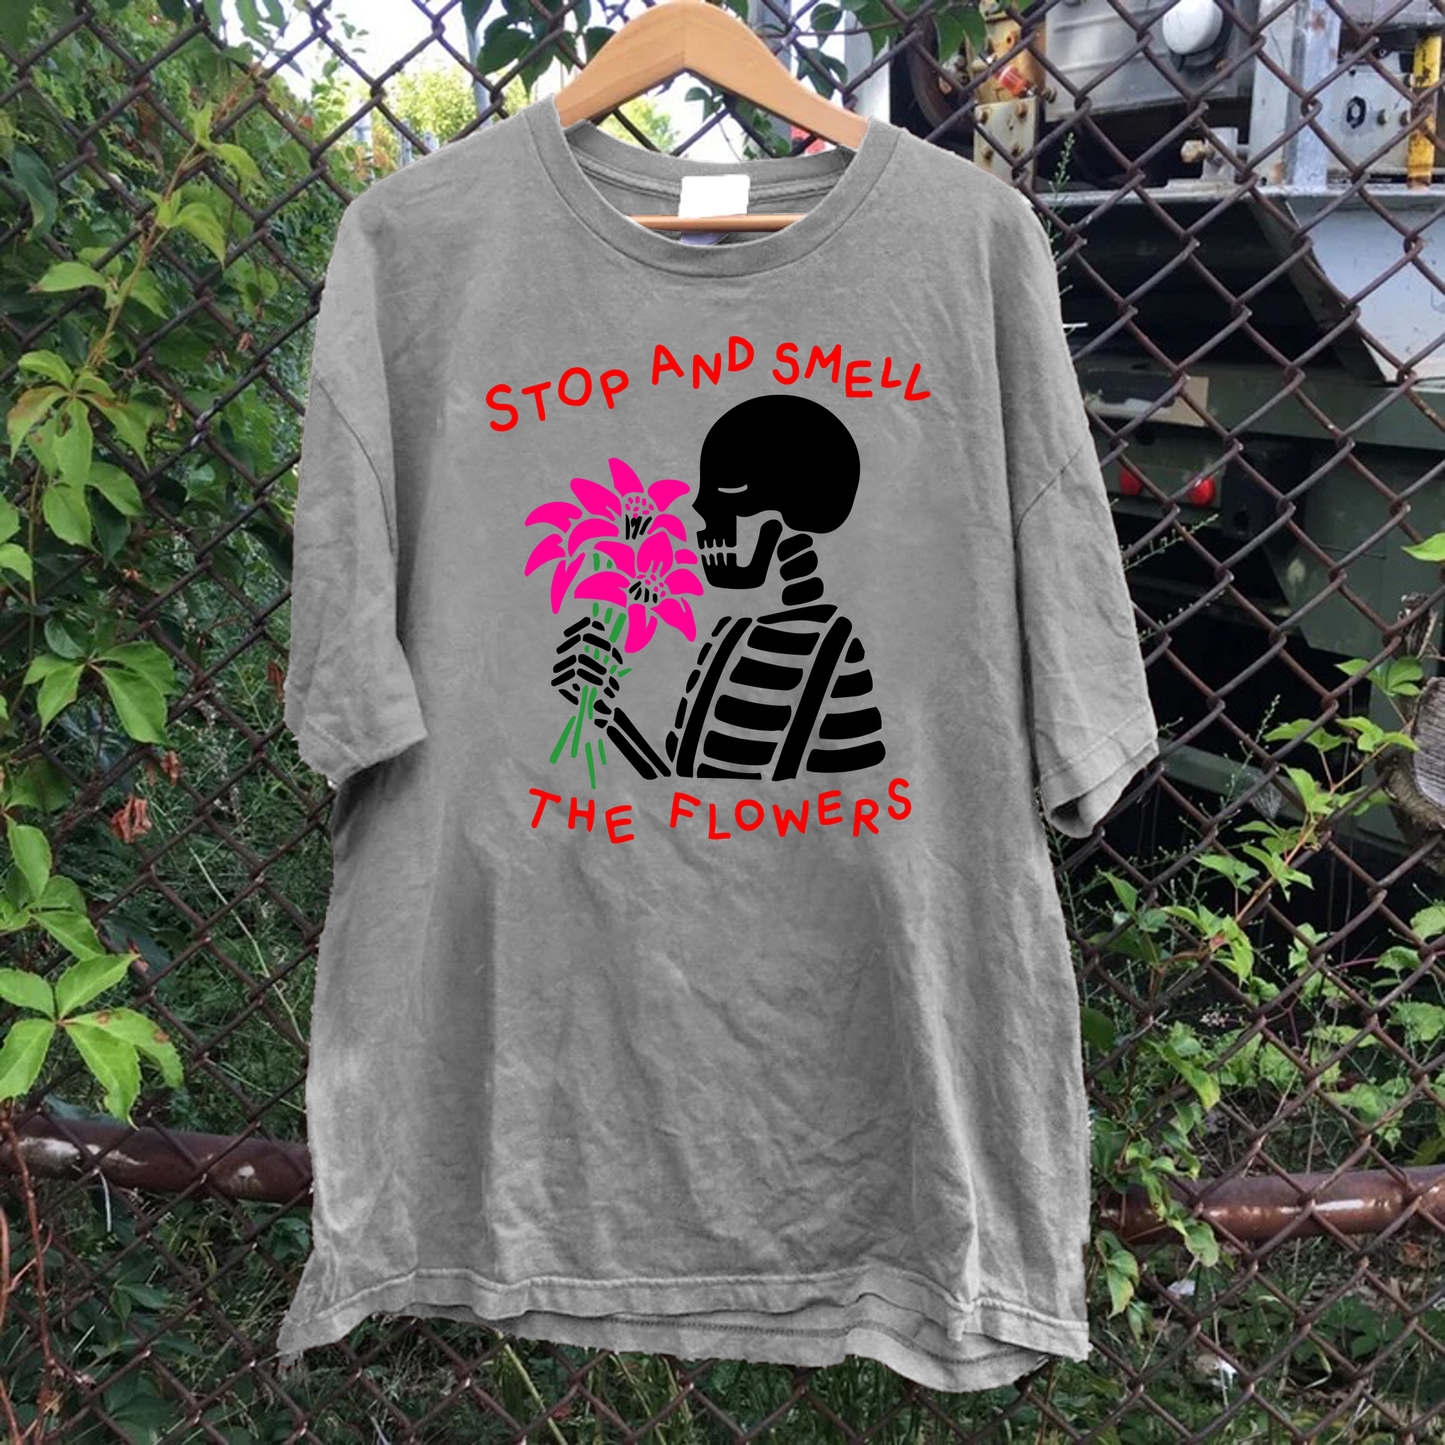 Stop And Smell The Flowers Skeleton Tee